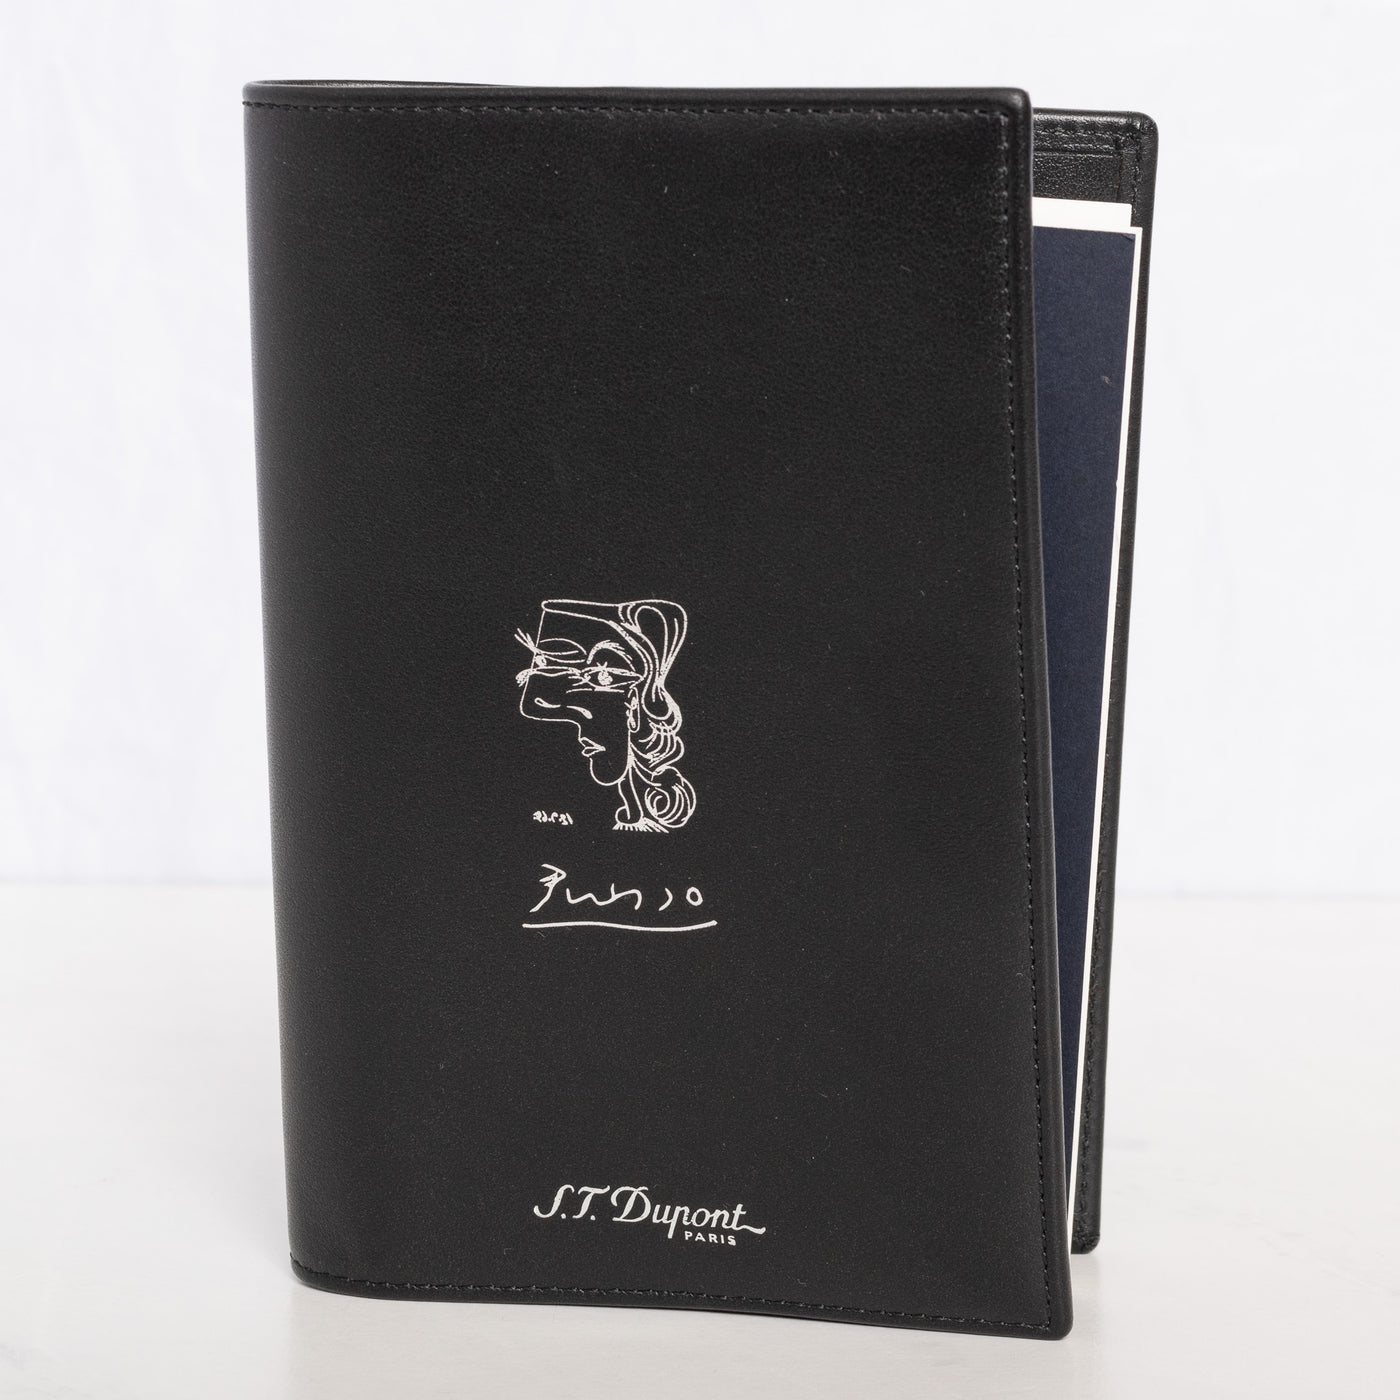 ST Dupont Picasso Special Edition Notebook black